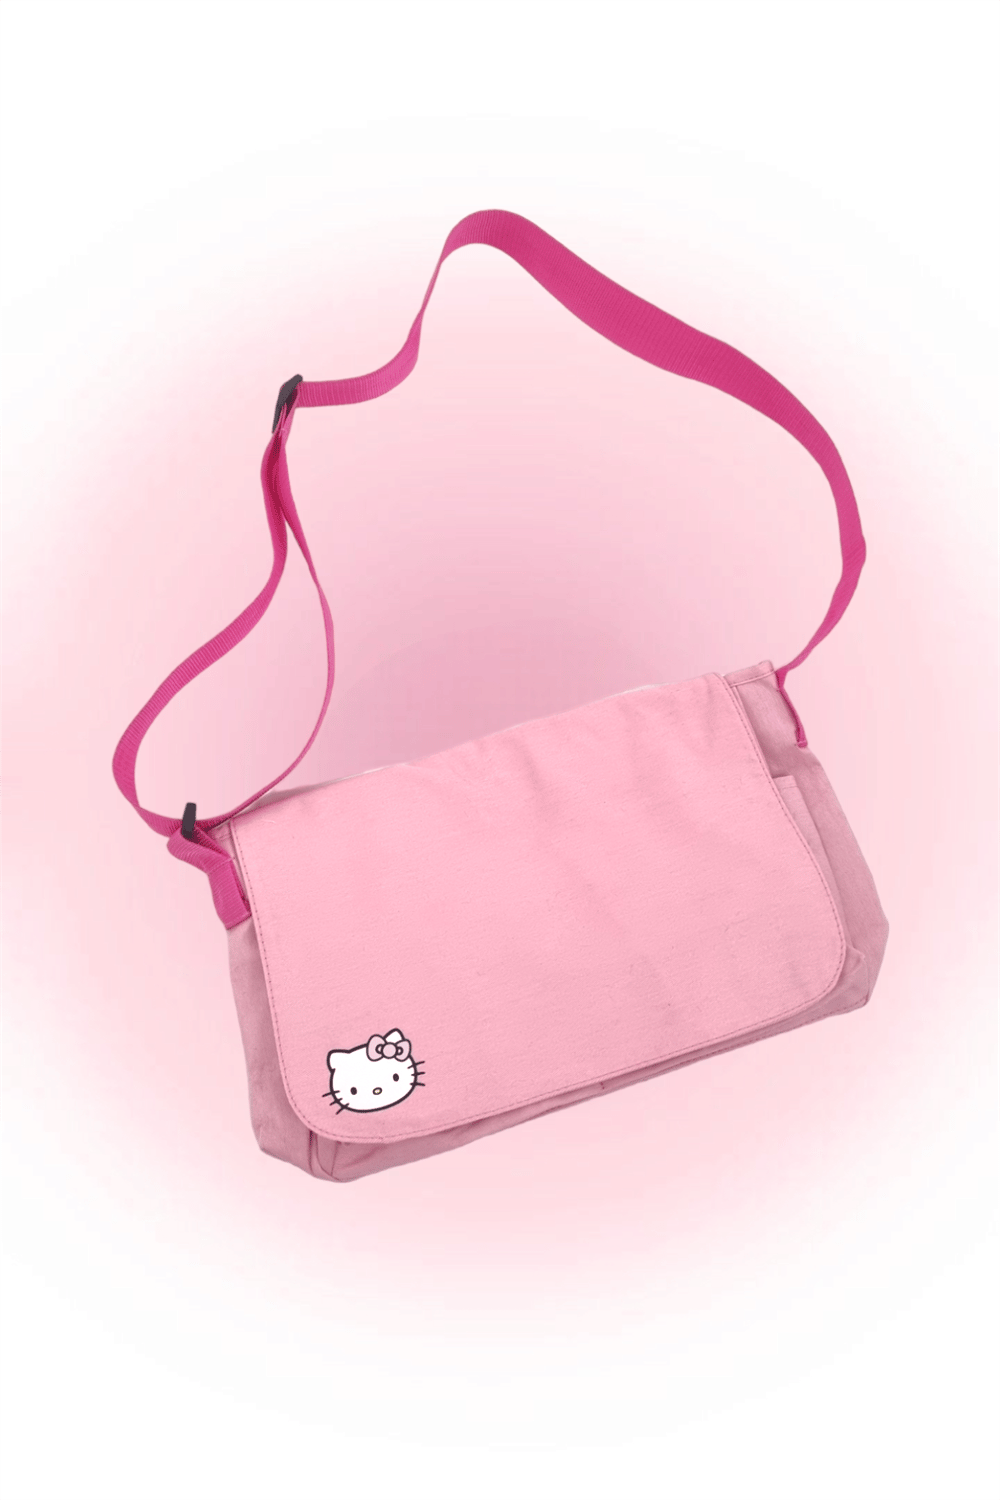 Little Cat Postman Bag Review Your Product Now